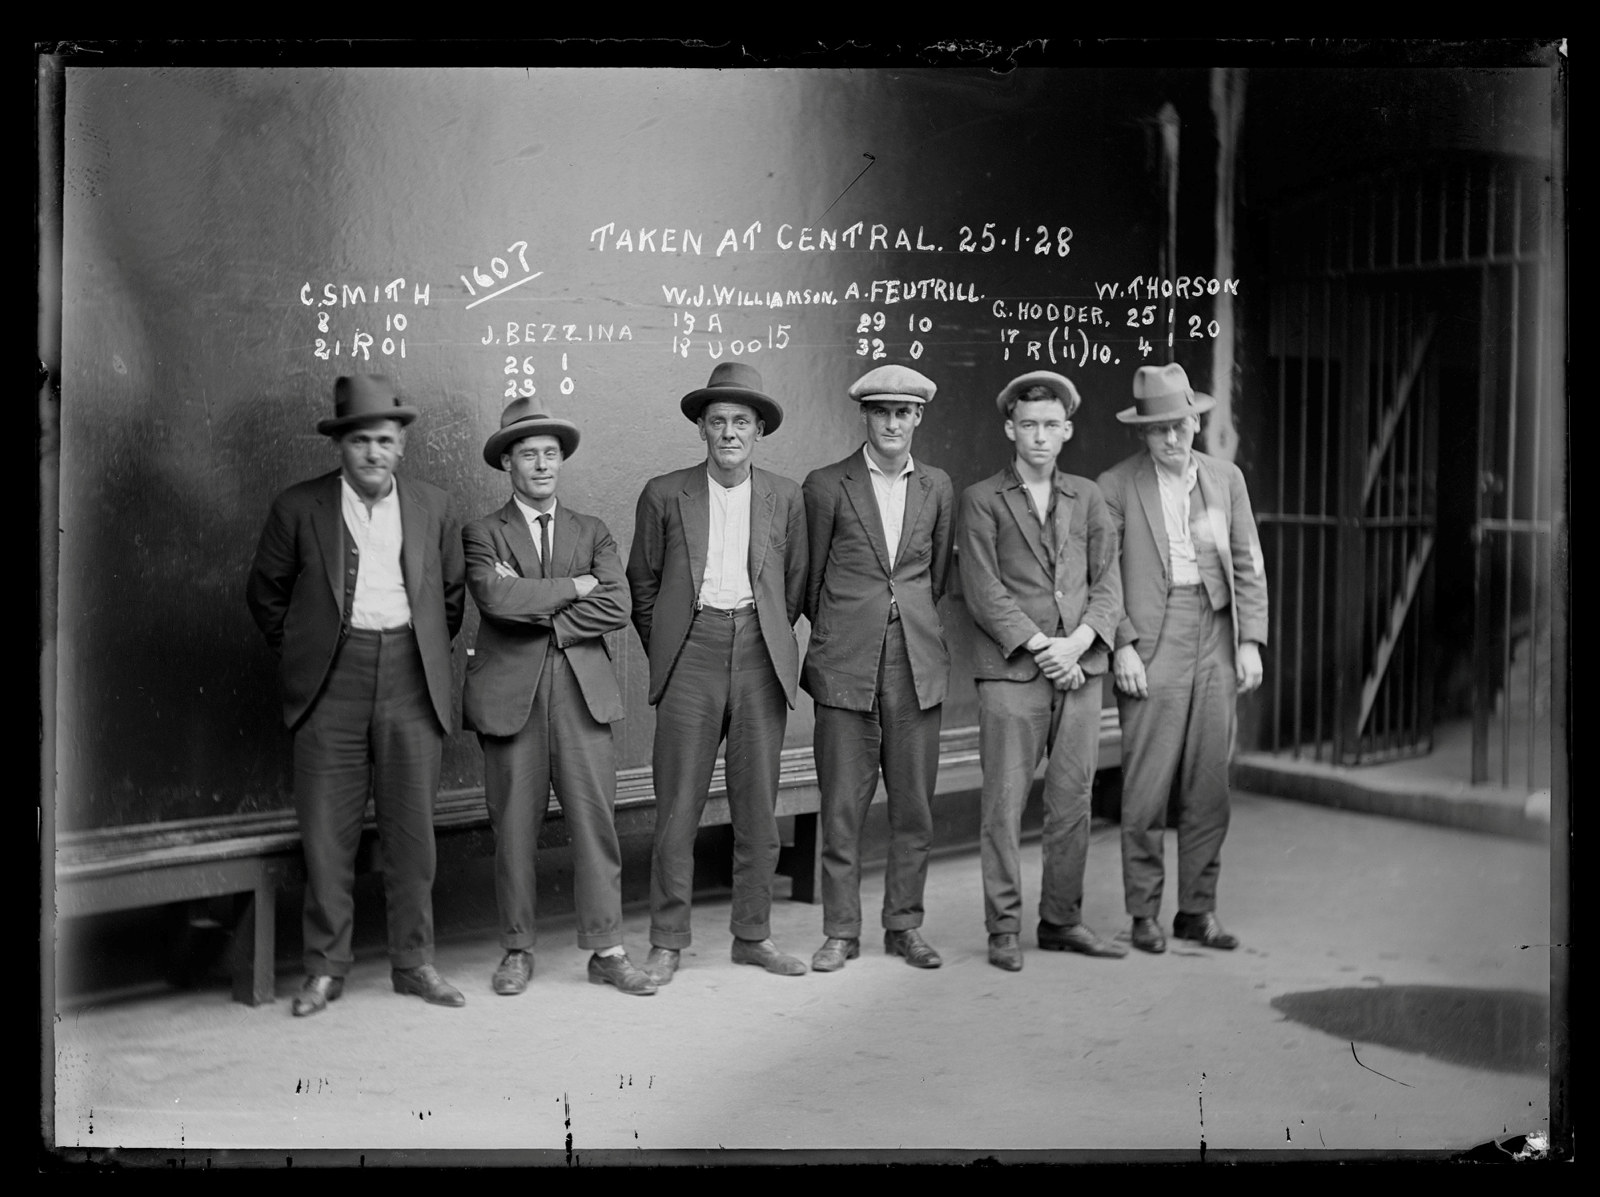 Black and white mugshot of six men standing in line, all with hats on.